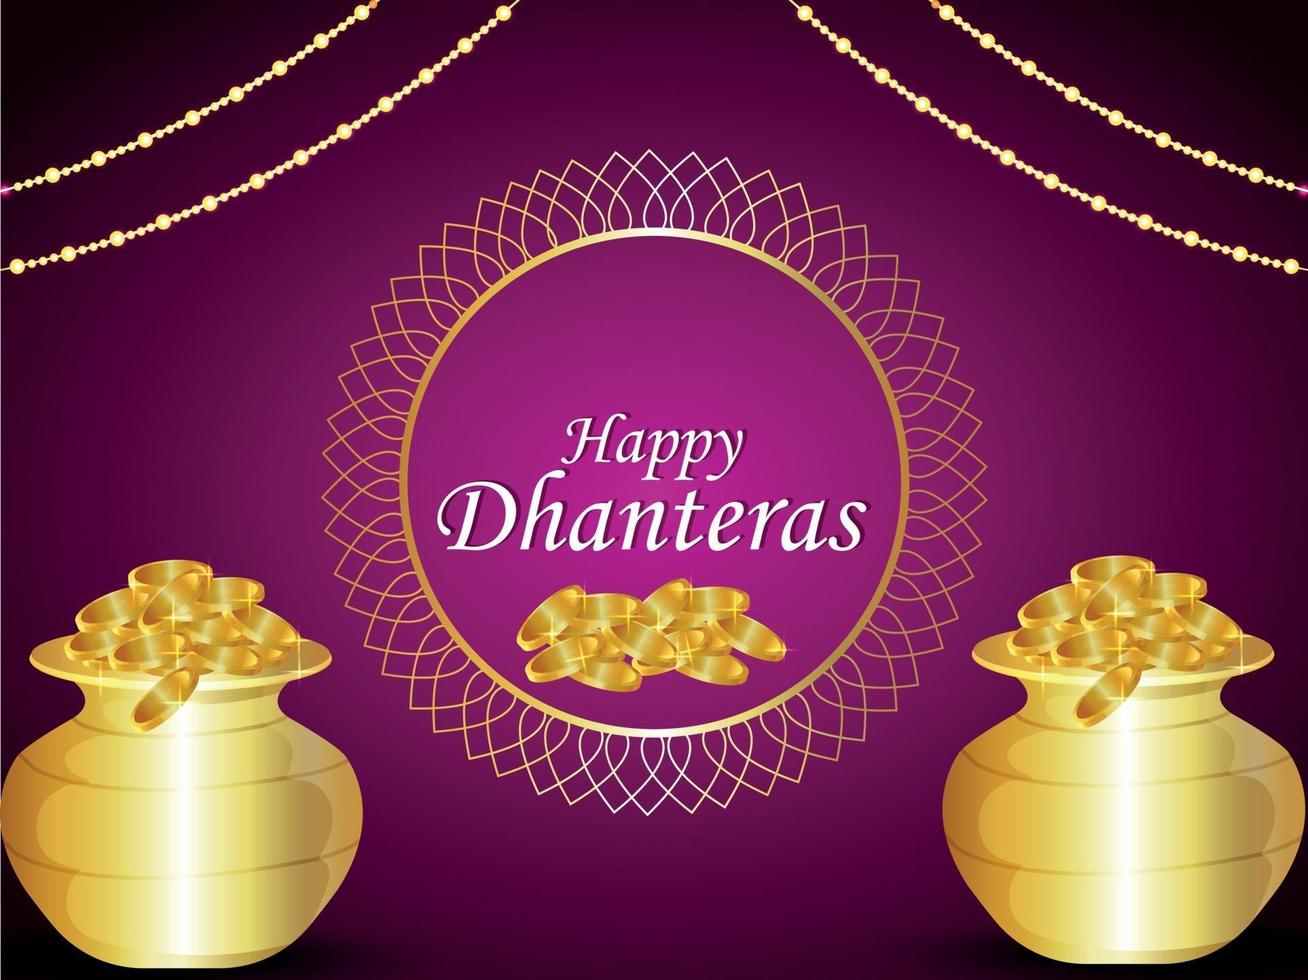 Happy dhanteras celebration greeting card with gold coin pot vector